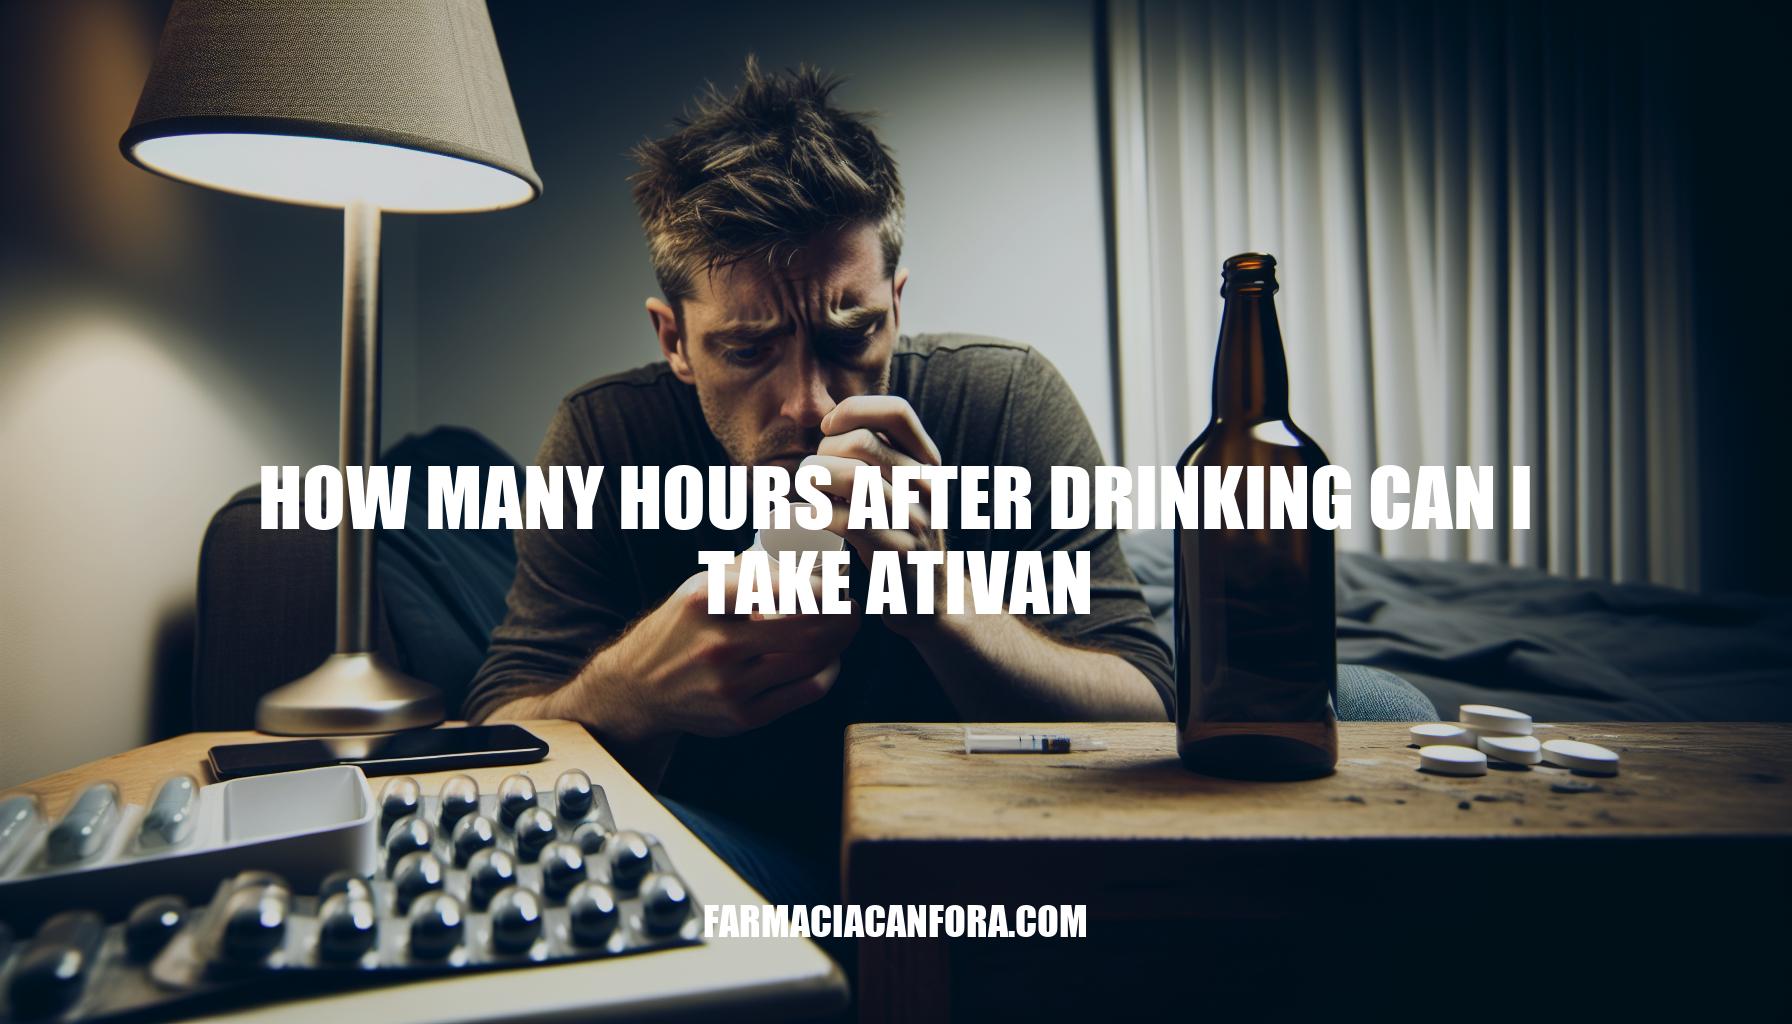 How Many Hours After Drinking Can I Take Ativan